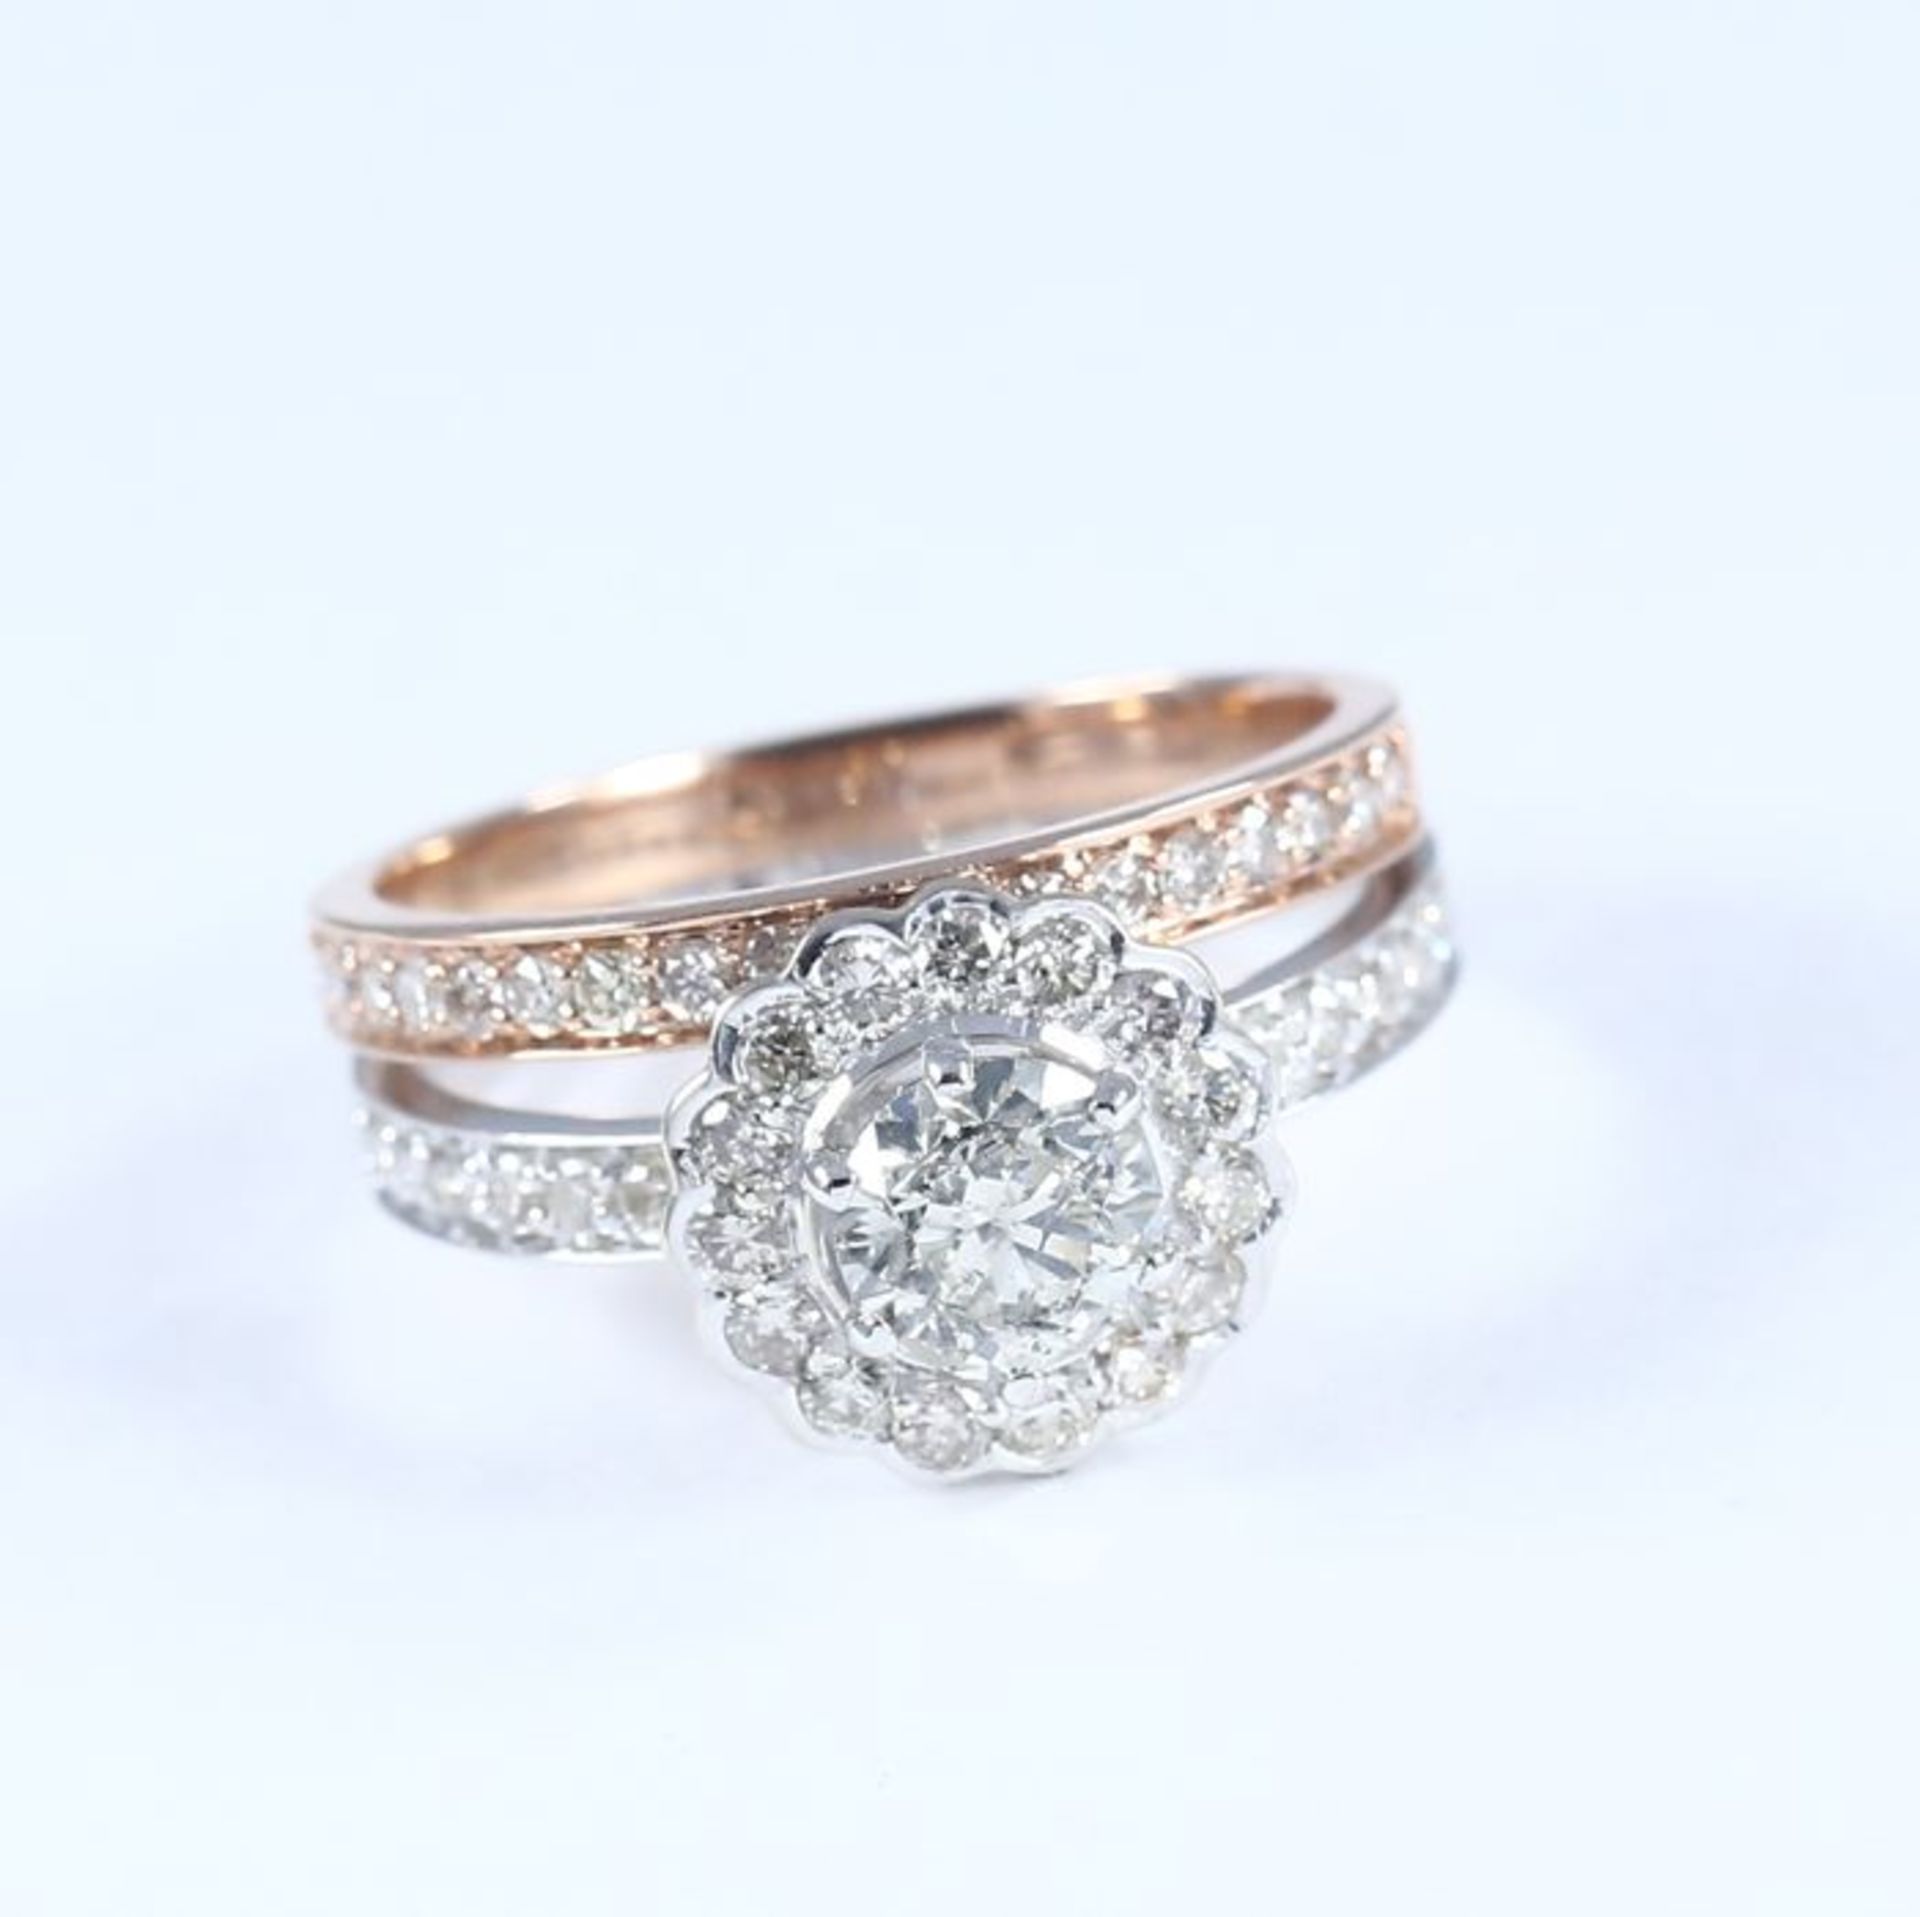 18 K/ 750 - Set of 2 Rings with Solitaire Diamond & Side Diamonds - Image 2 of 5